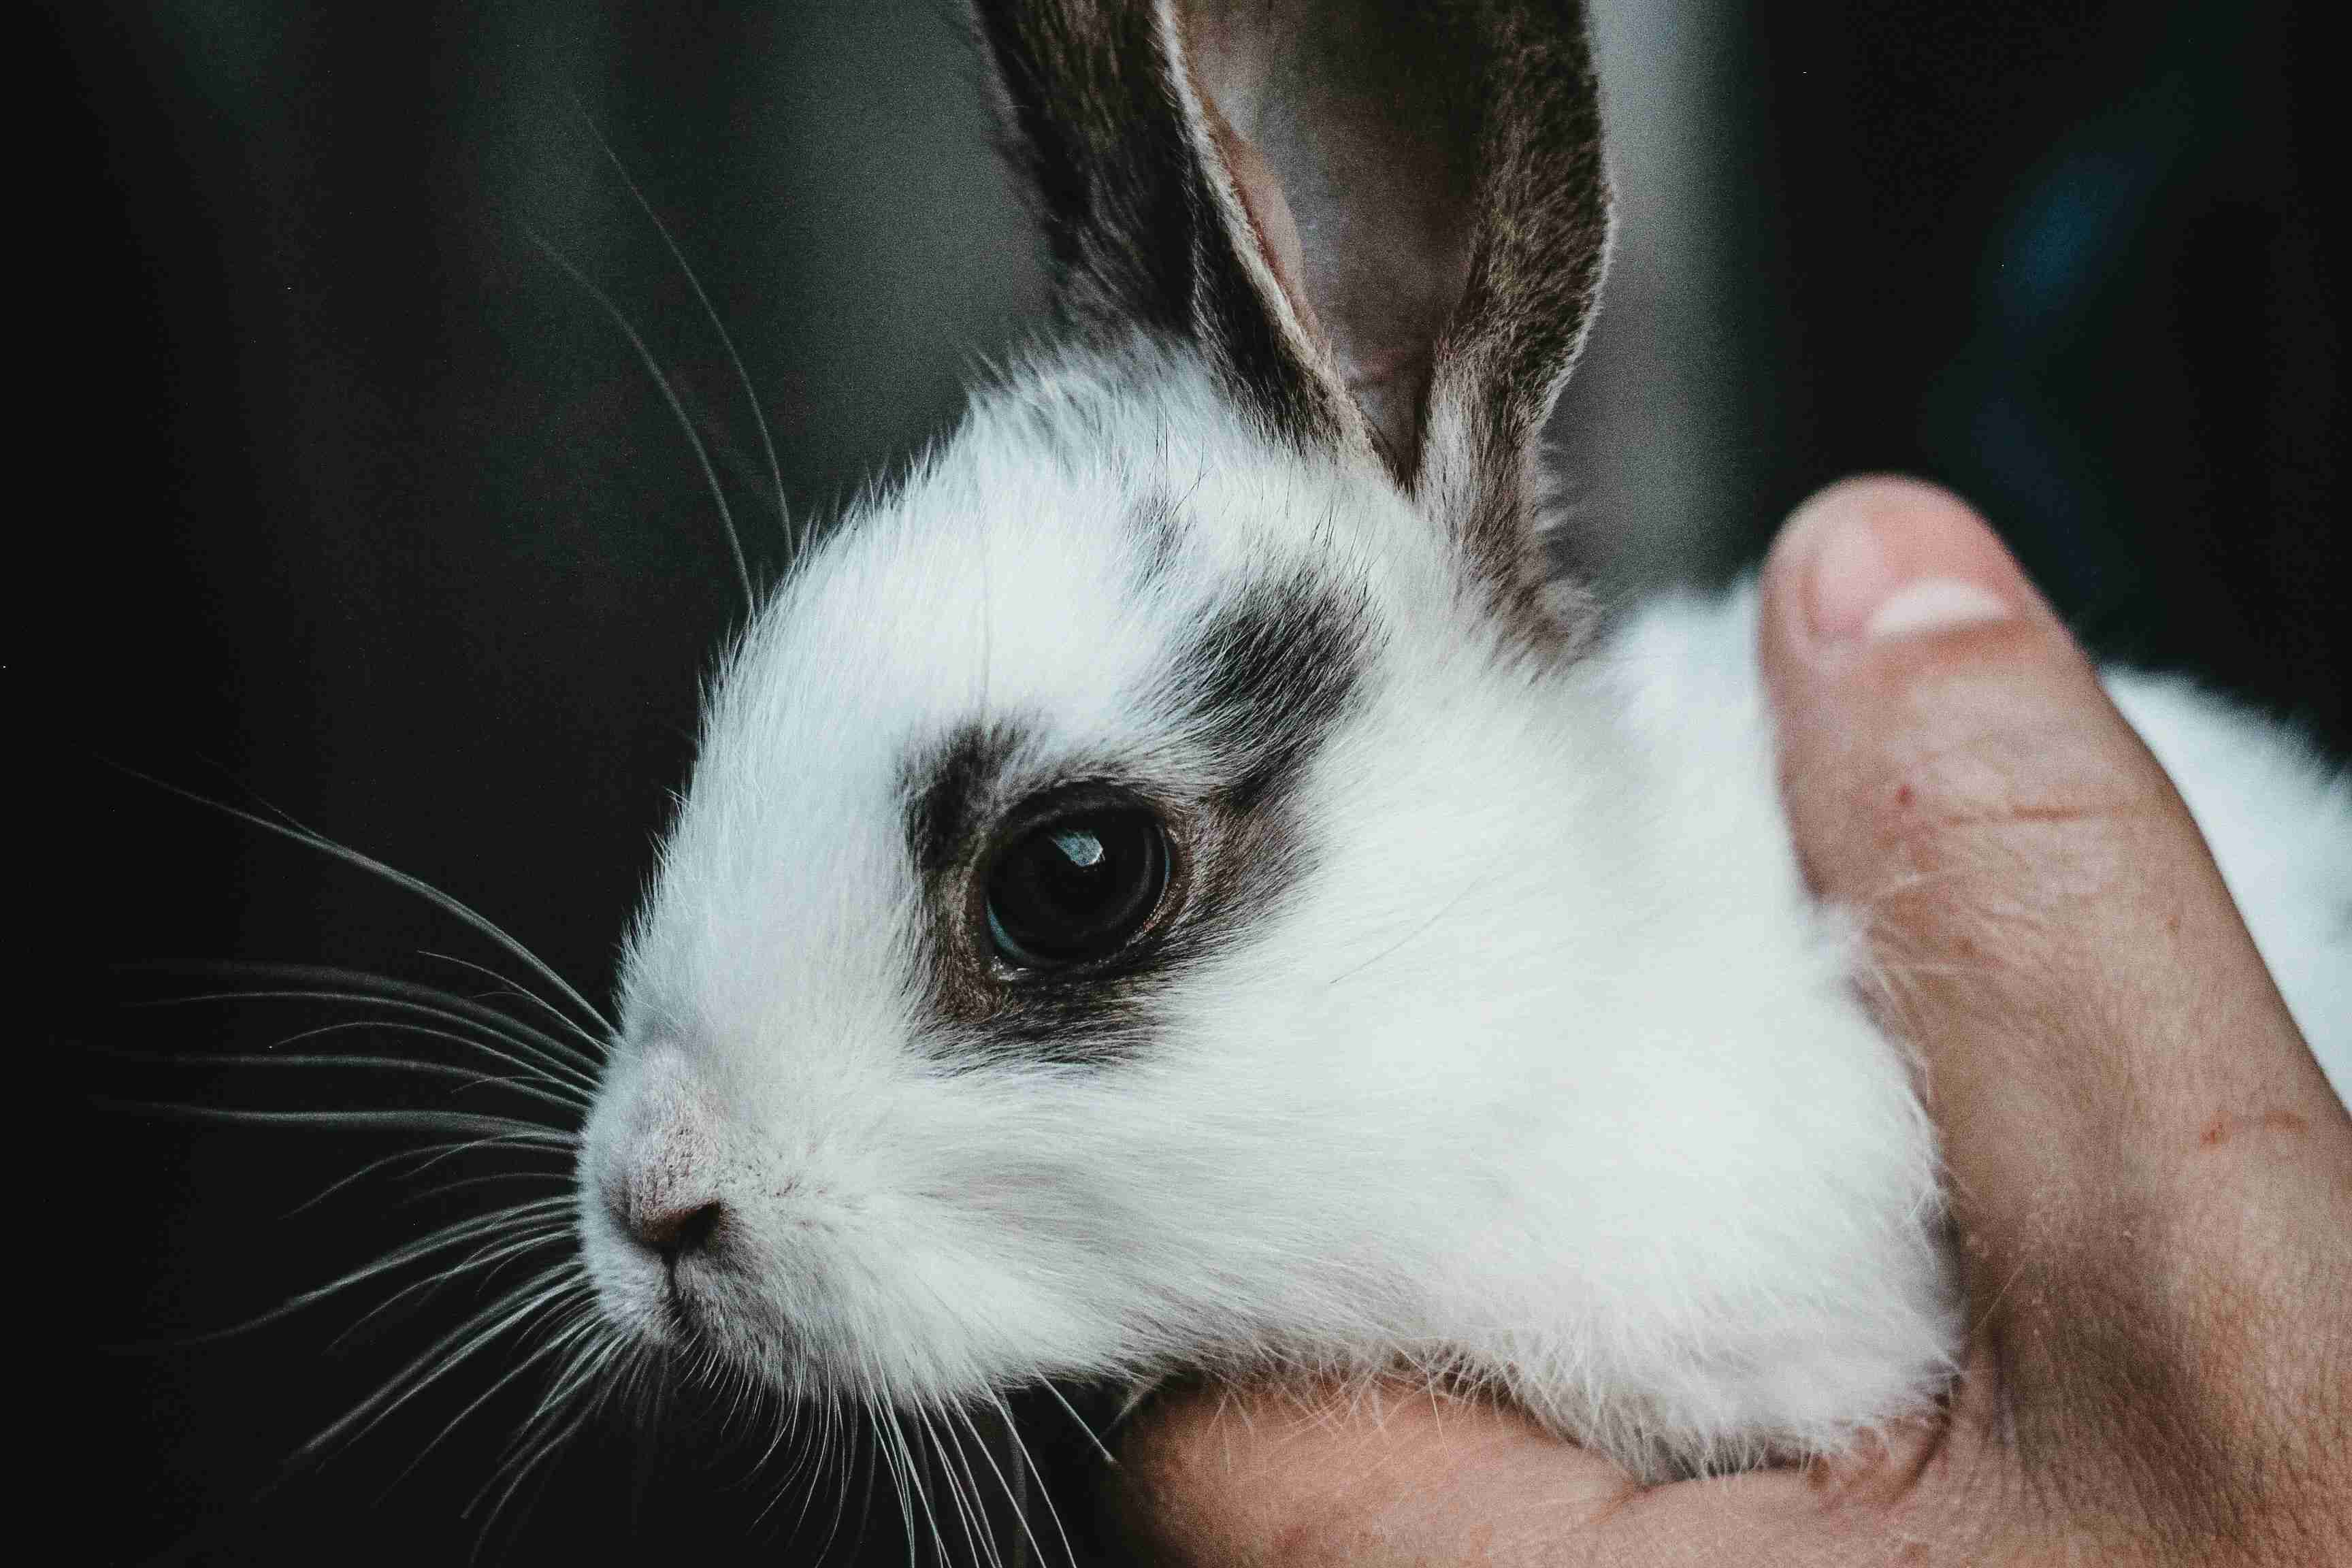 Is Your Pet Rabbit Suffering from a Skin Infection? Look Out for These Telltale Signs